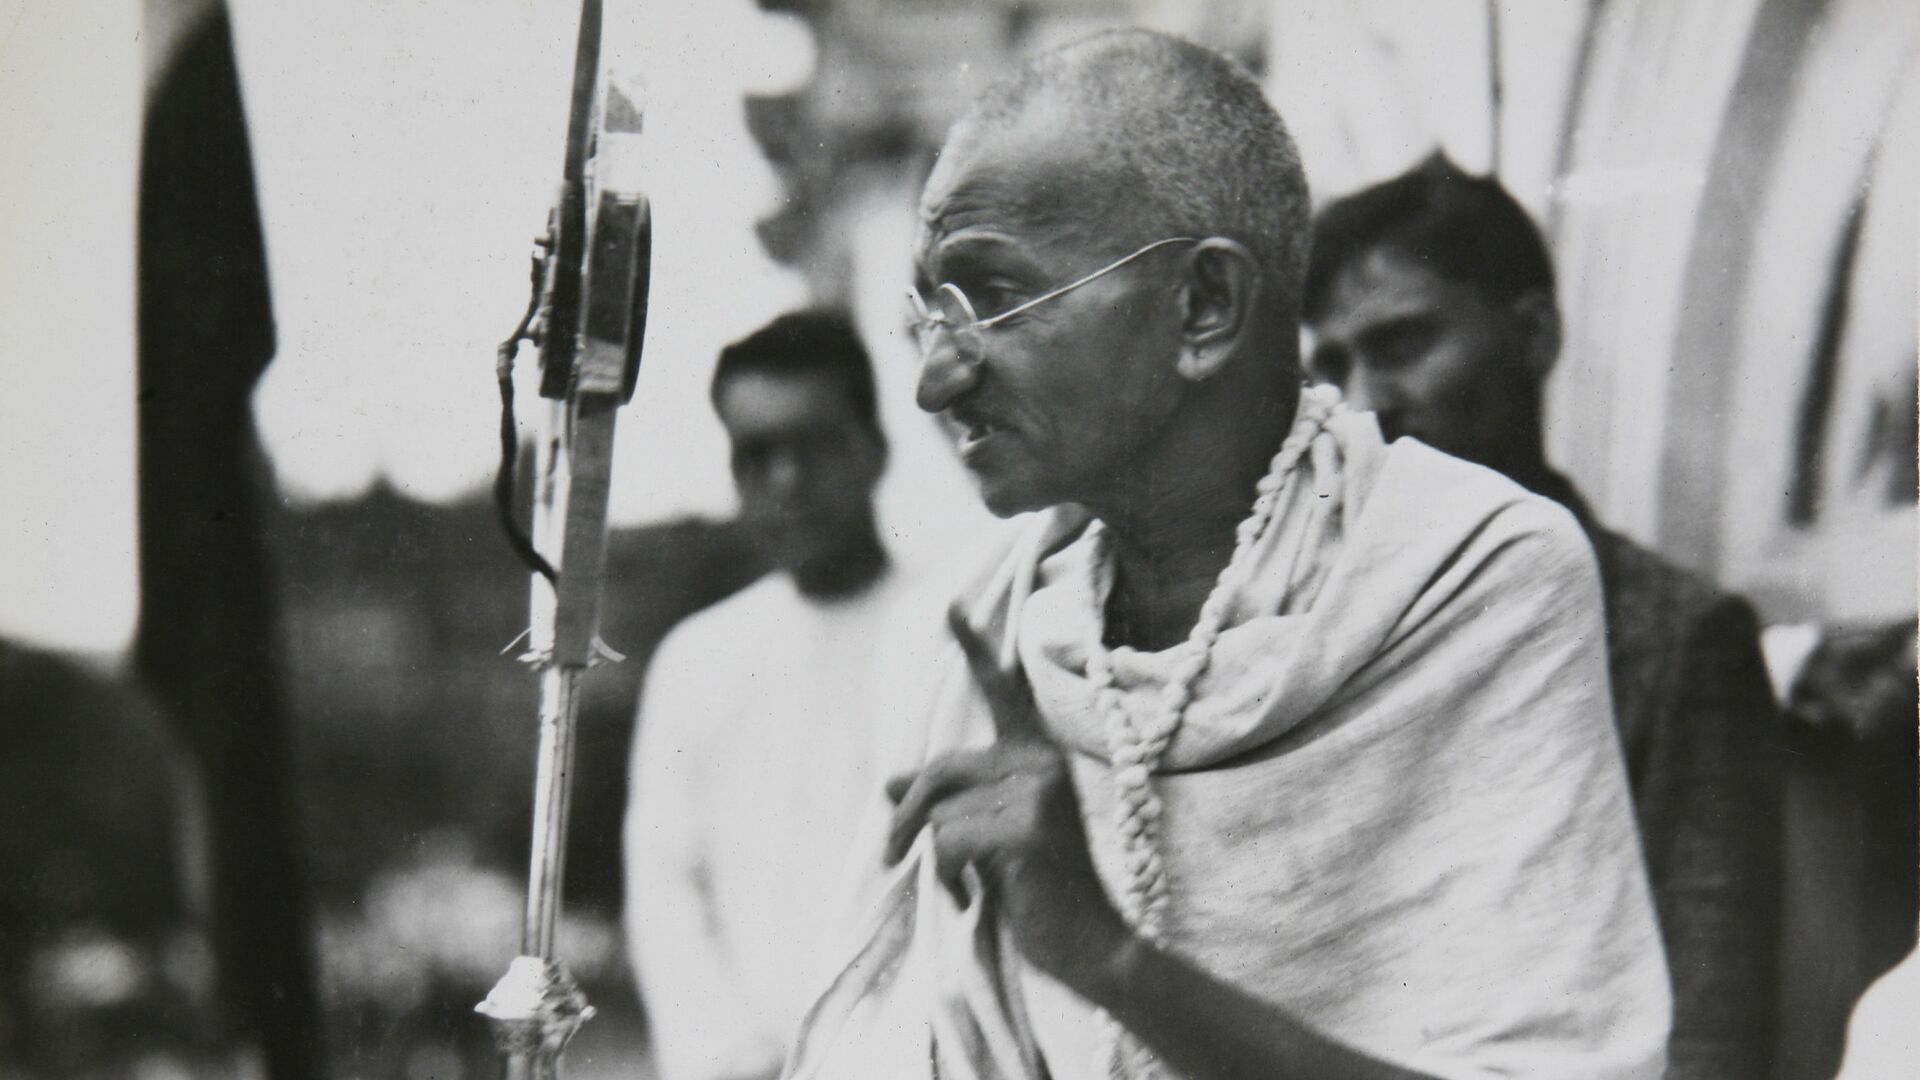 Mahatma Gandhi in a photo from a period album collected by AP reporter James A. Mills, ca. 1931. - Sputnik International, 1920, 02.10.2021